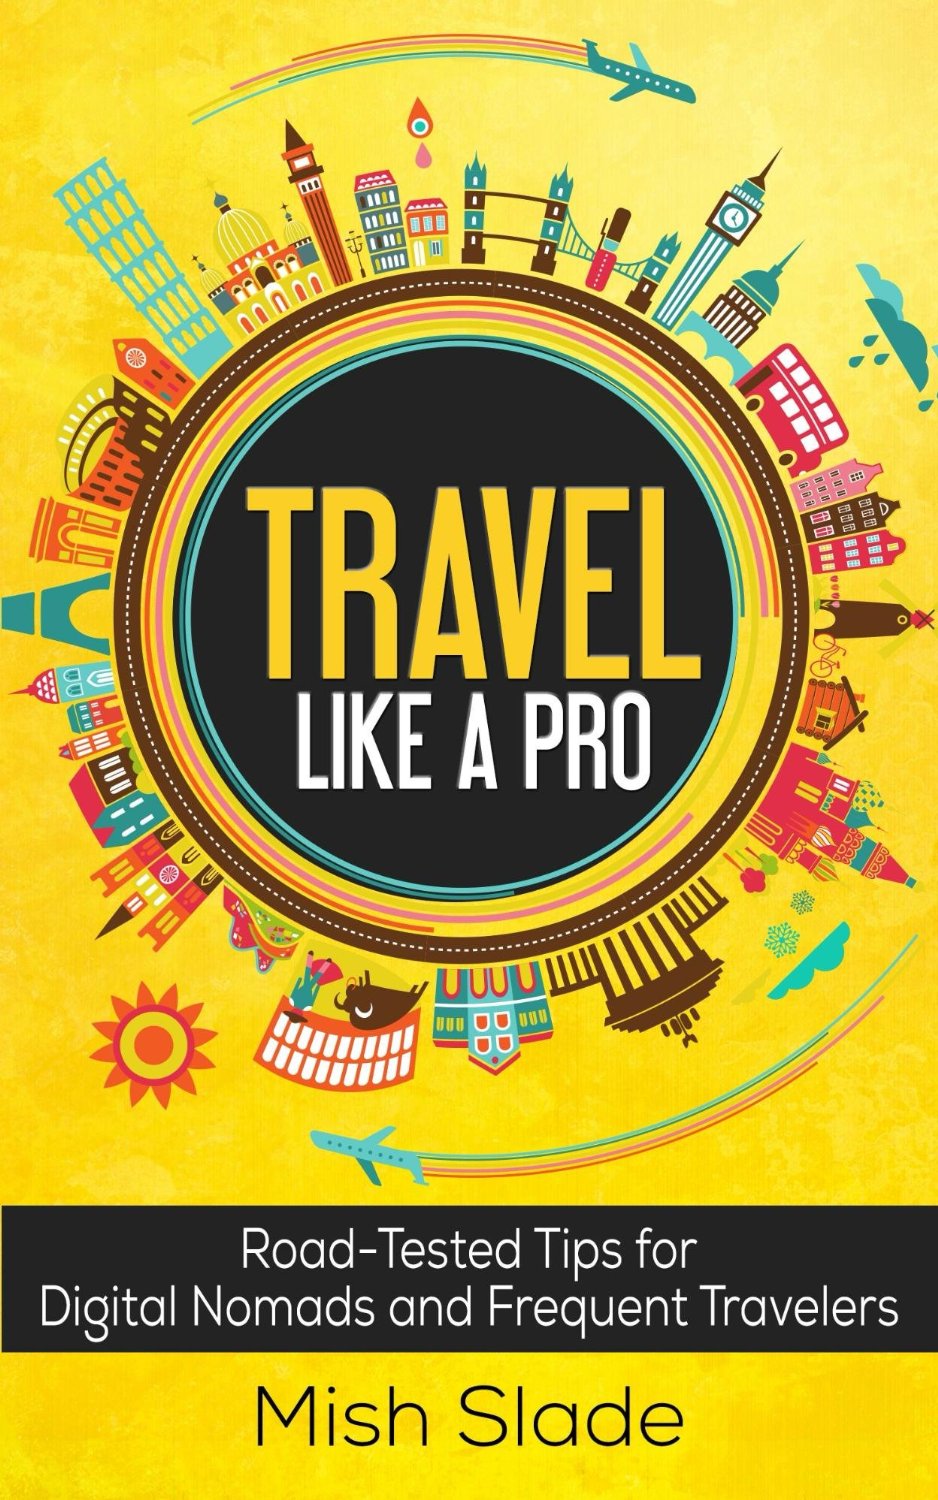 Travel Like a Pro (book review)